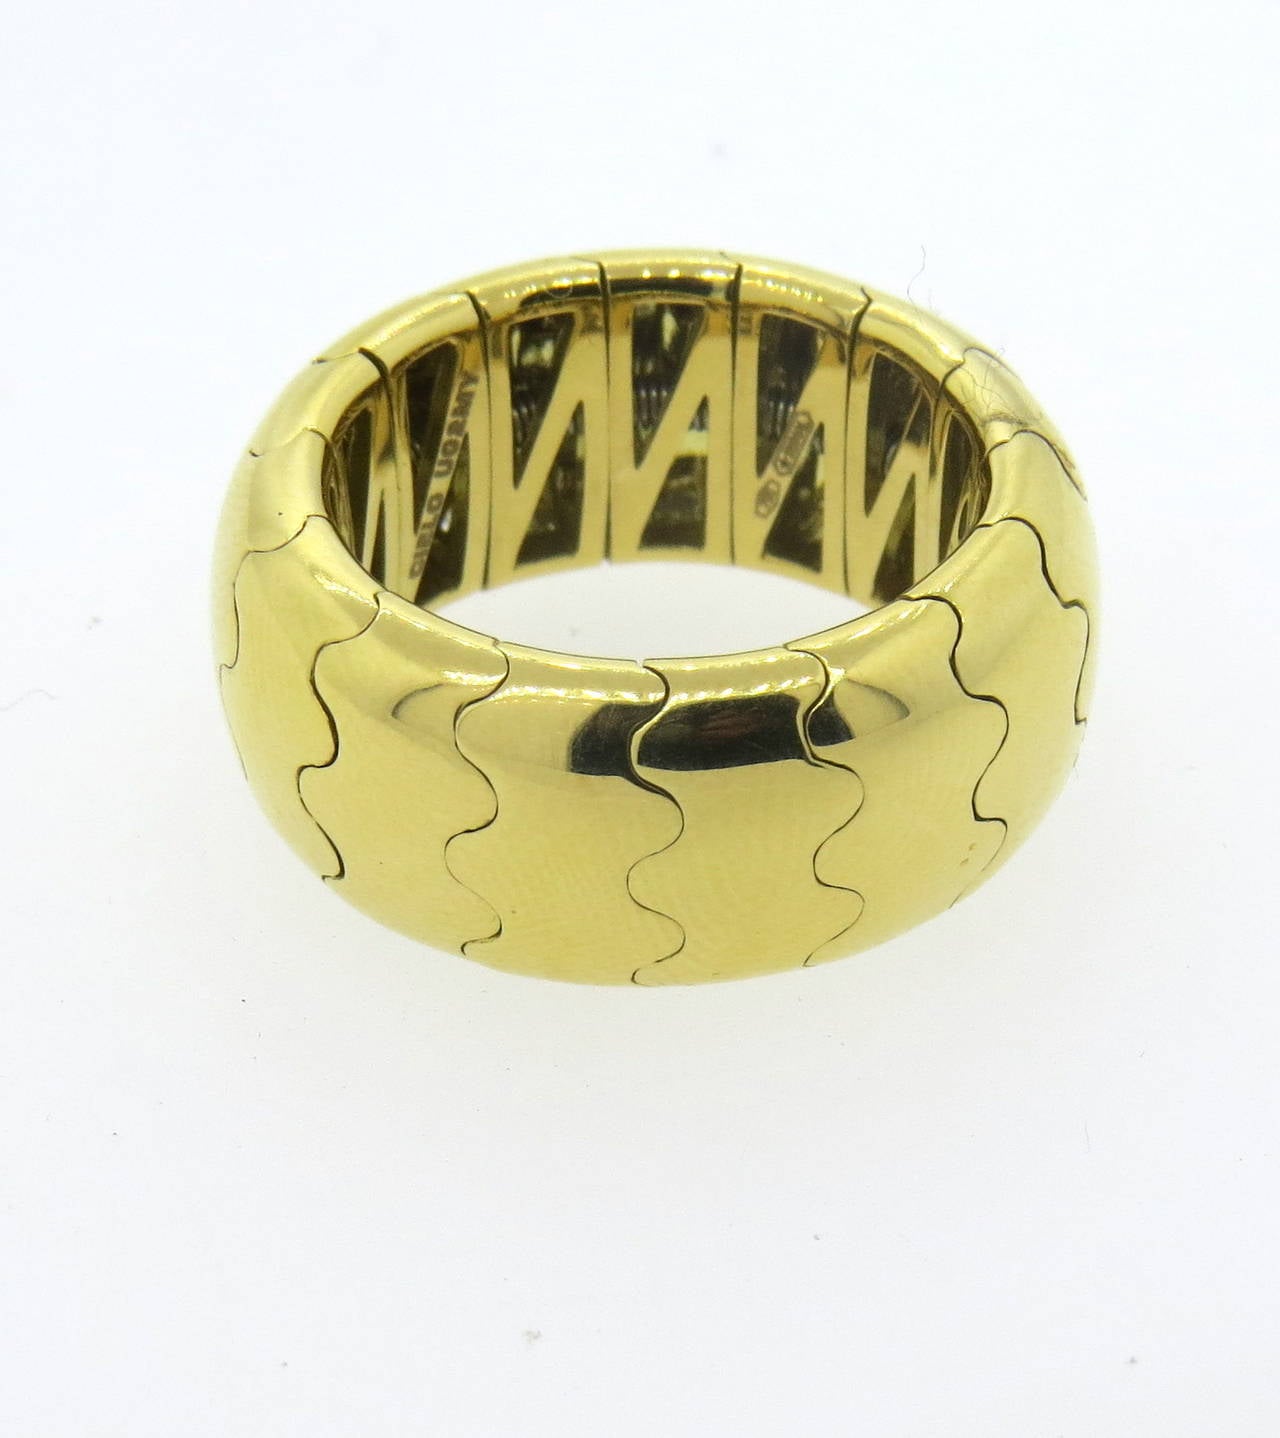 18k gold flexible band ring by Mattia Cielo from Universo collection. Ring is a size 6 (slightly flexible) and is 10mm wide. Marked Cielo U02MY, 750 and Italian mark. Weight of the piece - 16.6 grams
Retails for $3100